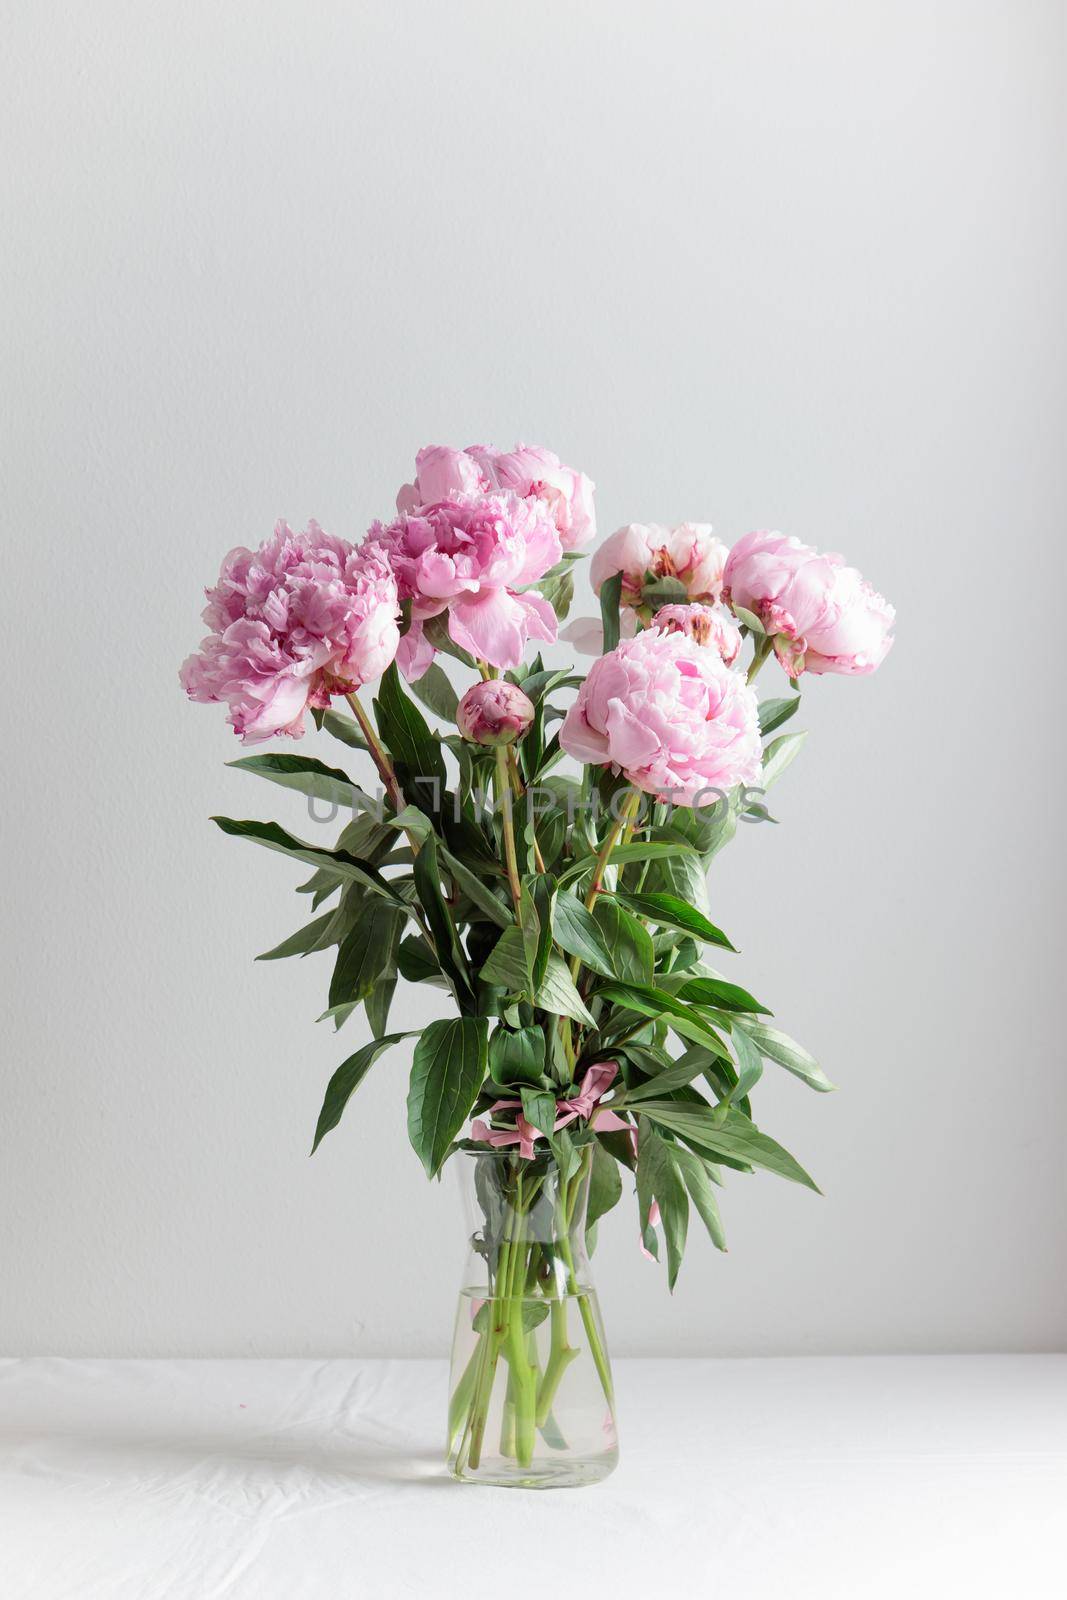 Beautiful bunch of fresh Pastel colored Pink peonies in full bloom in vase with white background by Gudzar